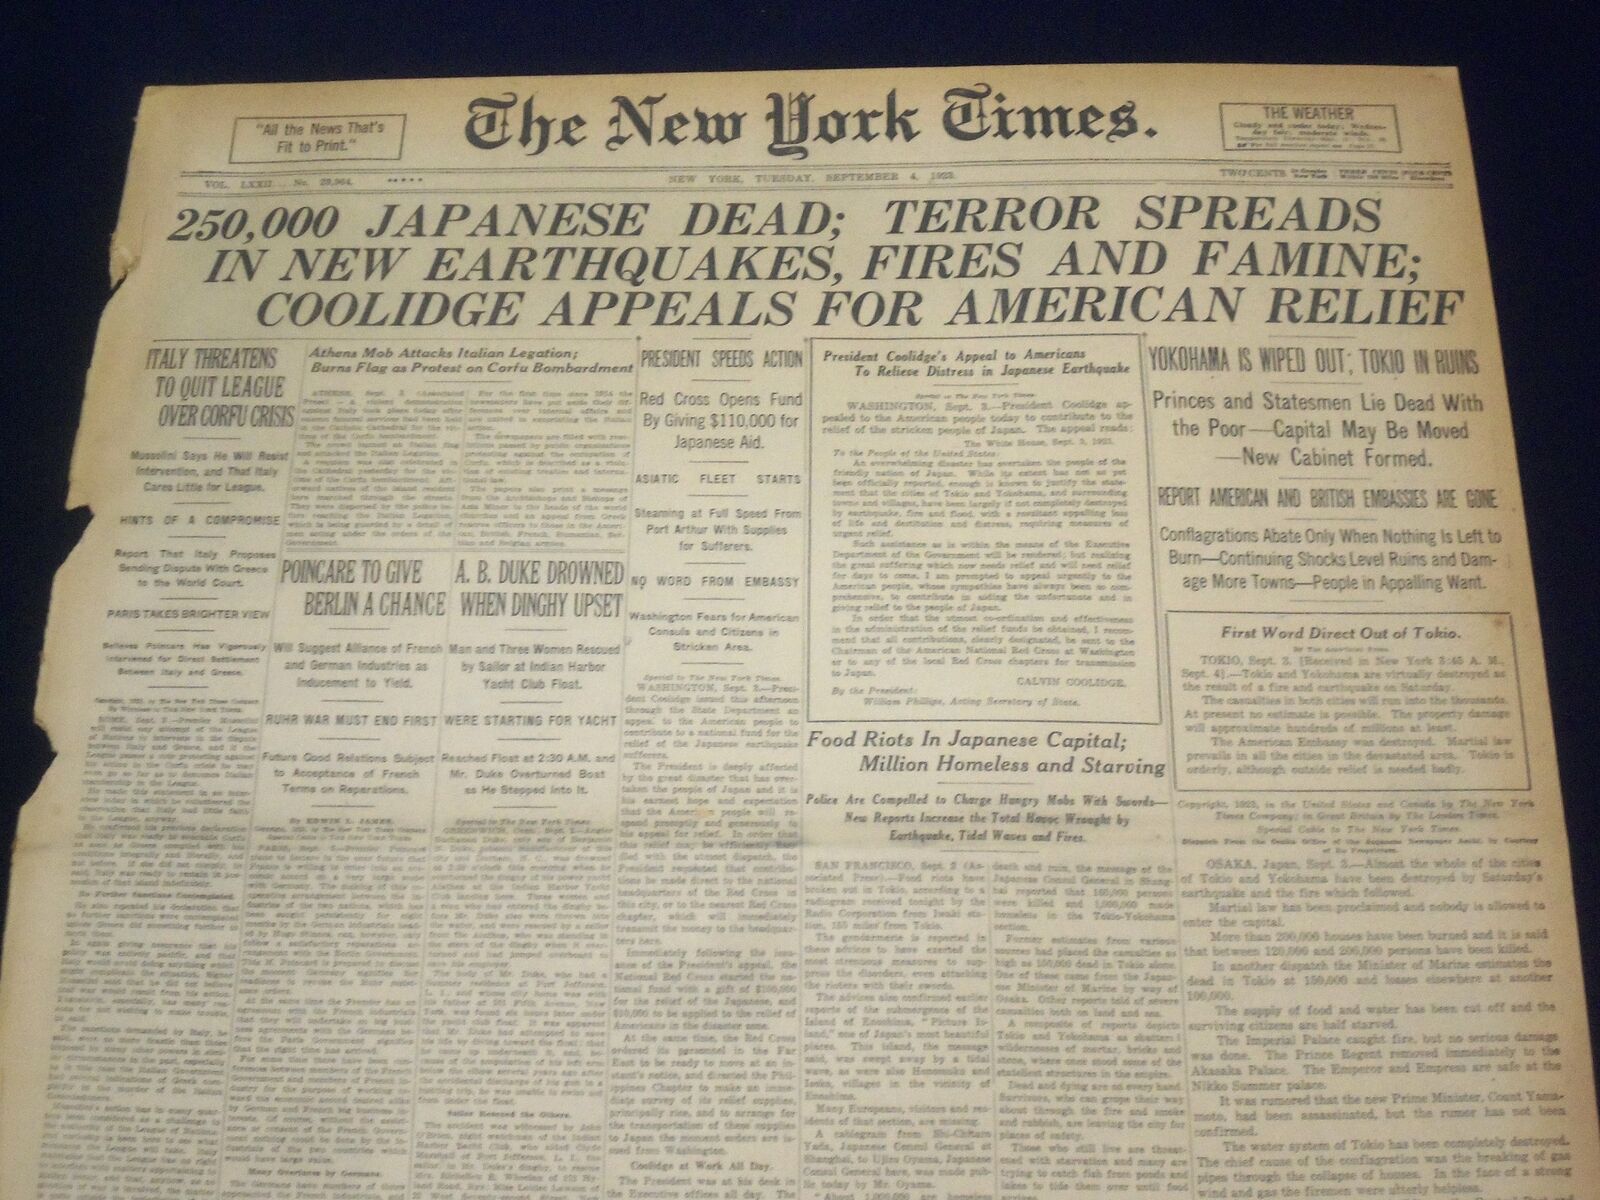 1923 SEP 4 NEW YORK TIMES - 250,000 JAPANESE DEAD IN NEW EARTHQUAKES - NT 9348